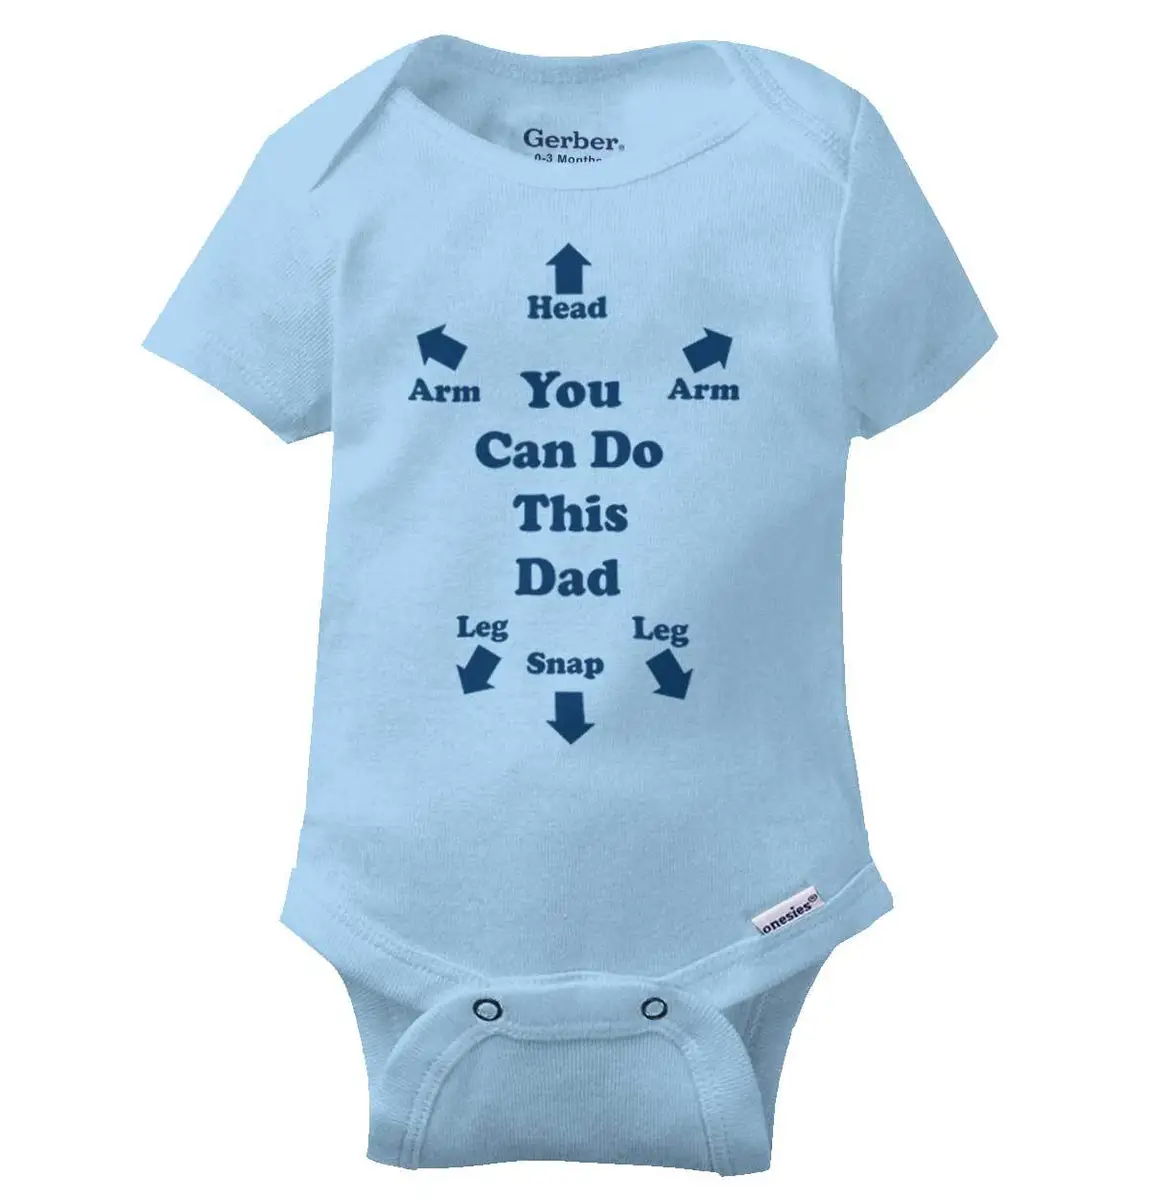 New Dad Funny Father Cute Newborn Outfit Newborn Baby Boy Girl Infant Romper